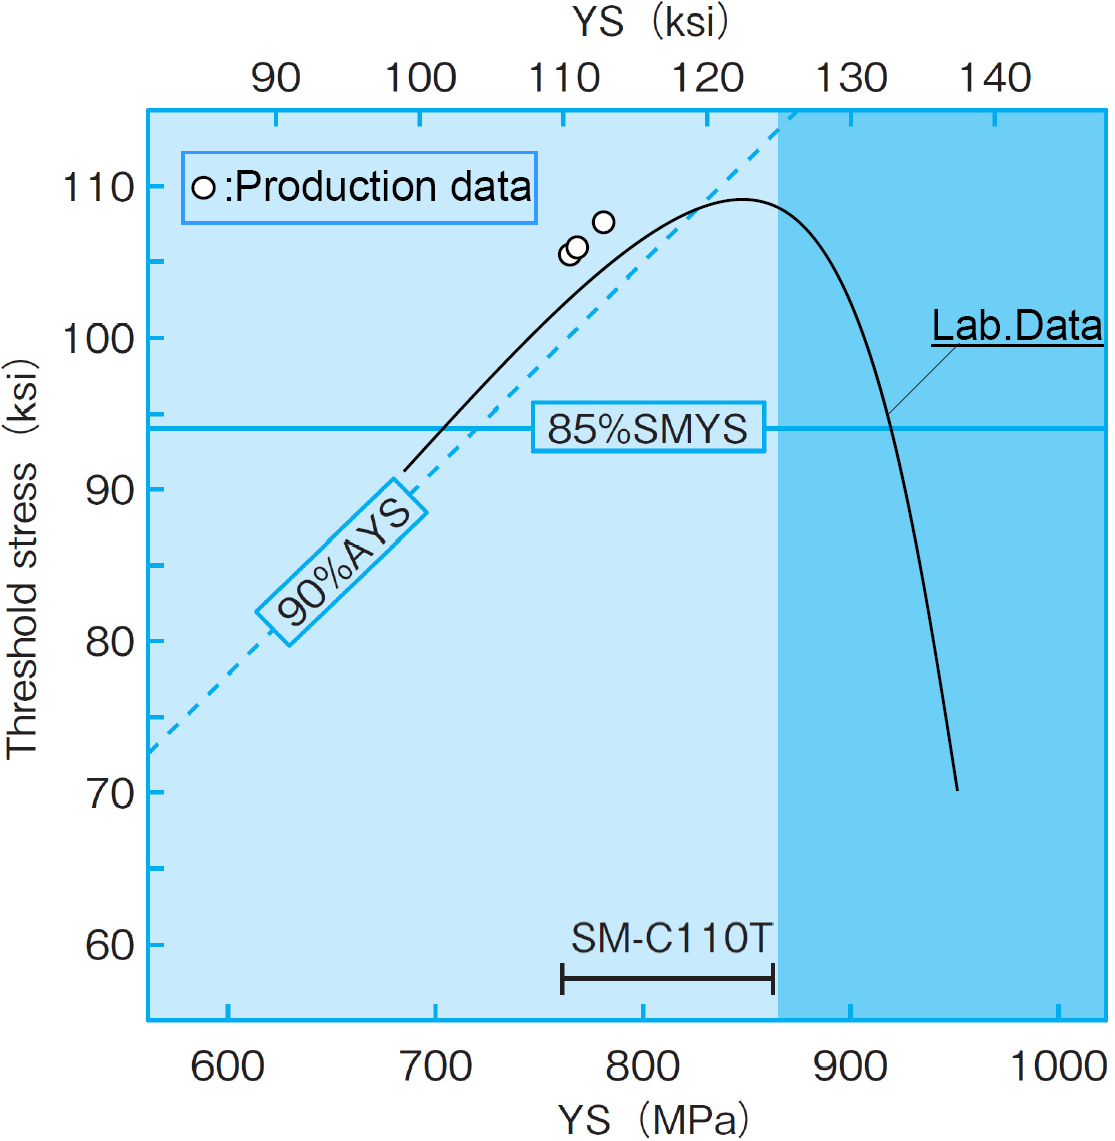 SM-C110T SSC suceptibility to material Yield Strength and applied threshold stress.